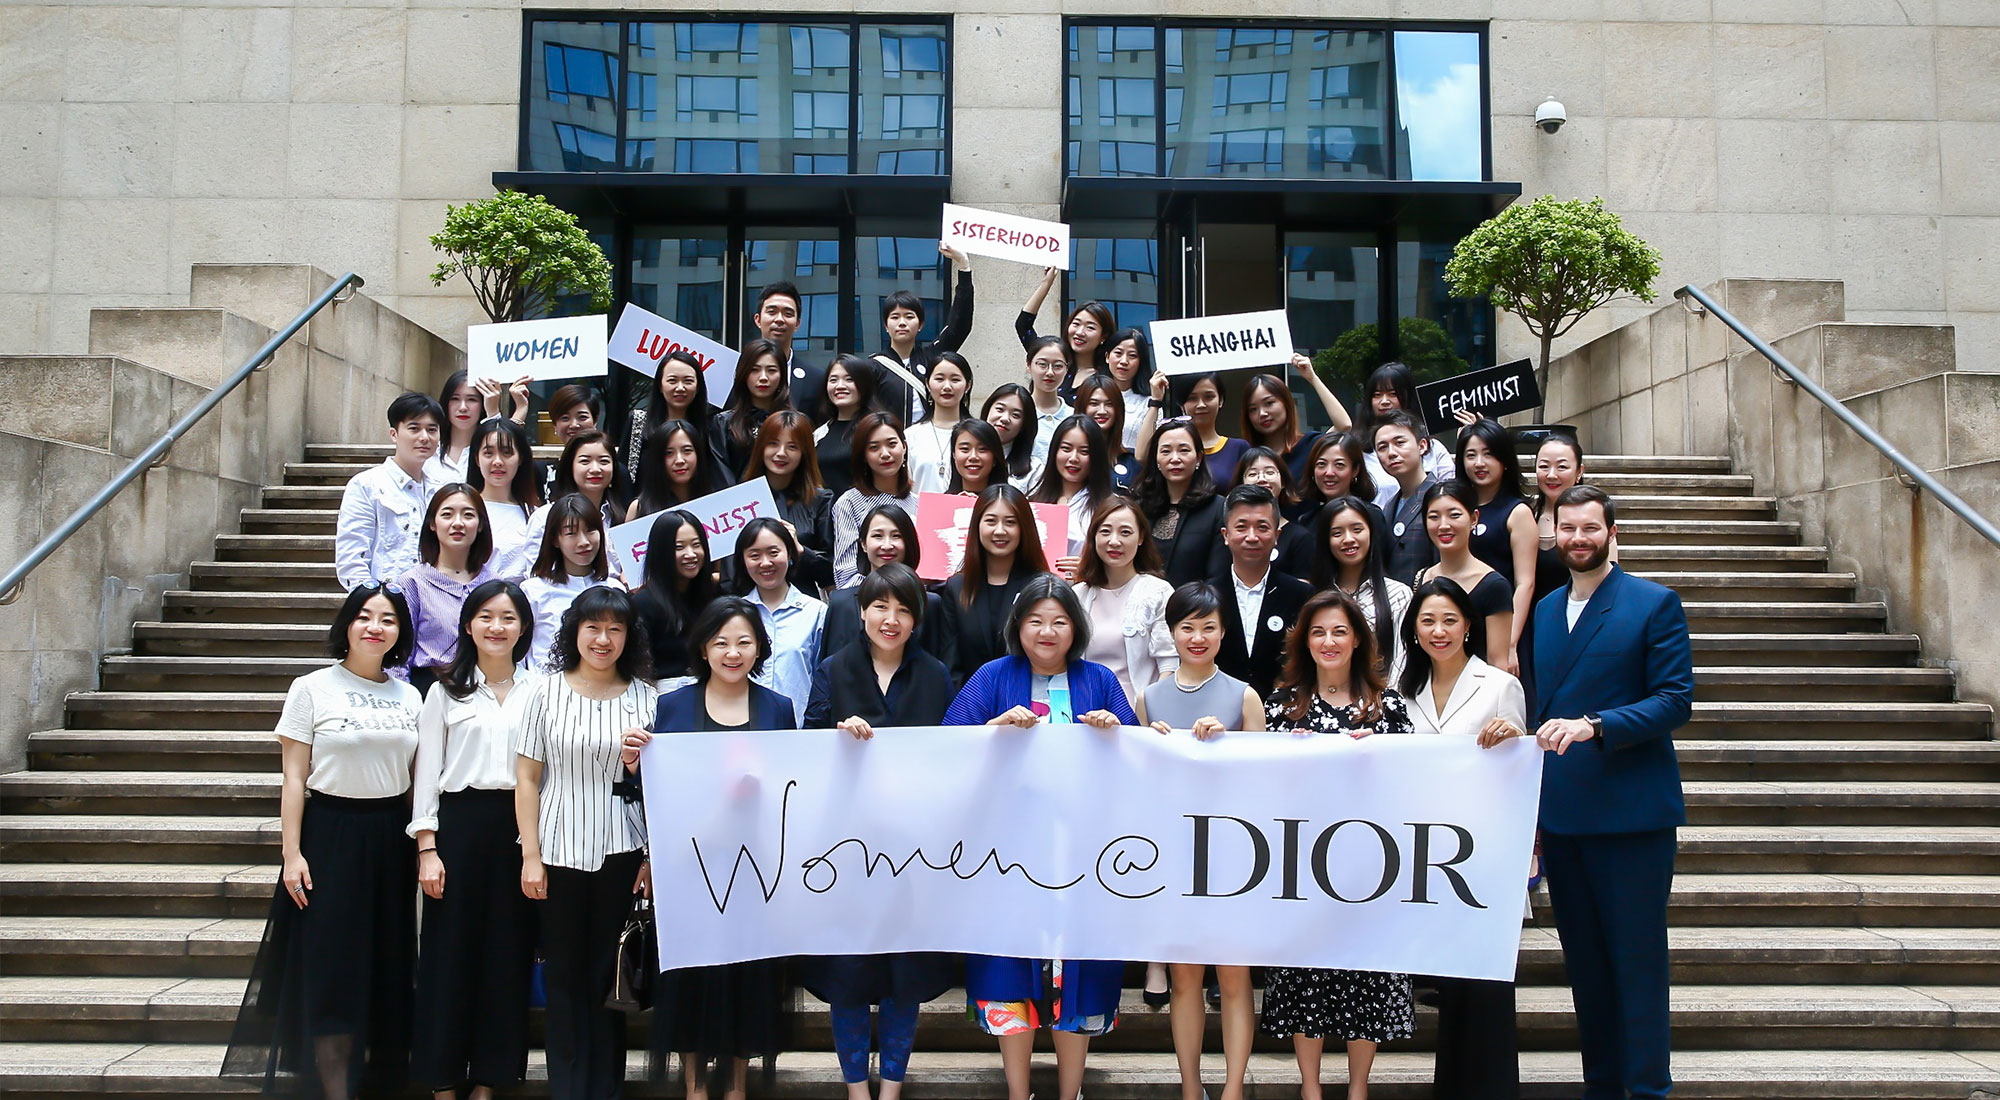 LVMH on Twitter: Since the creation of its Women@Dior mentoring